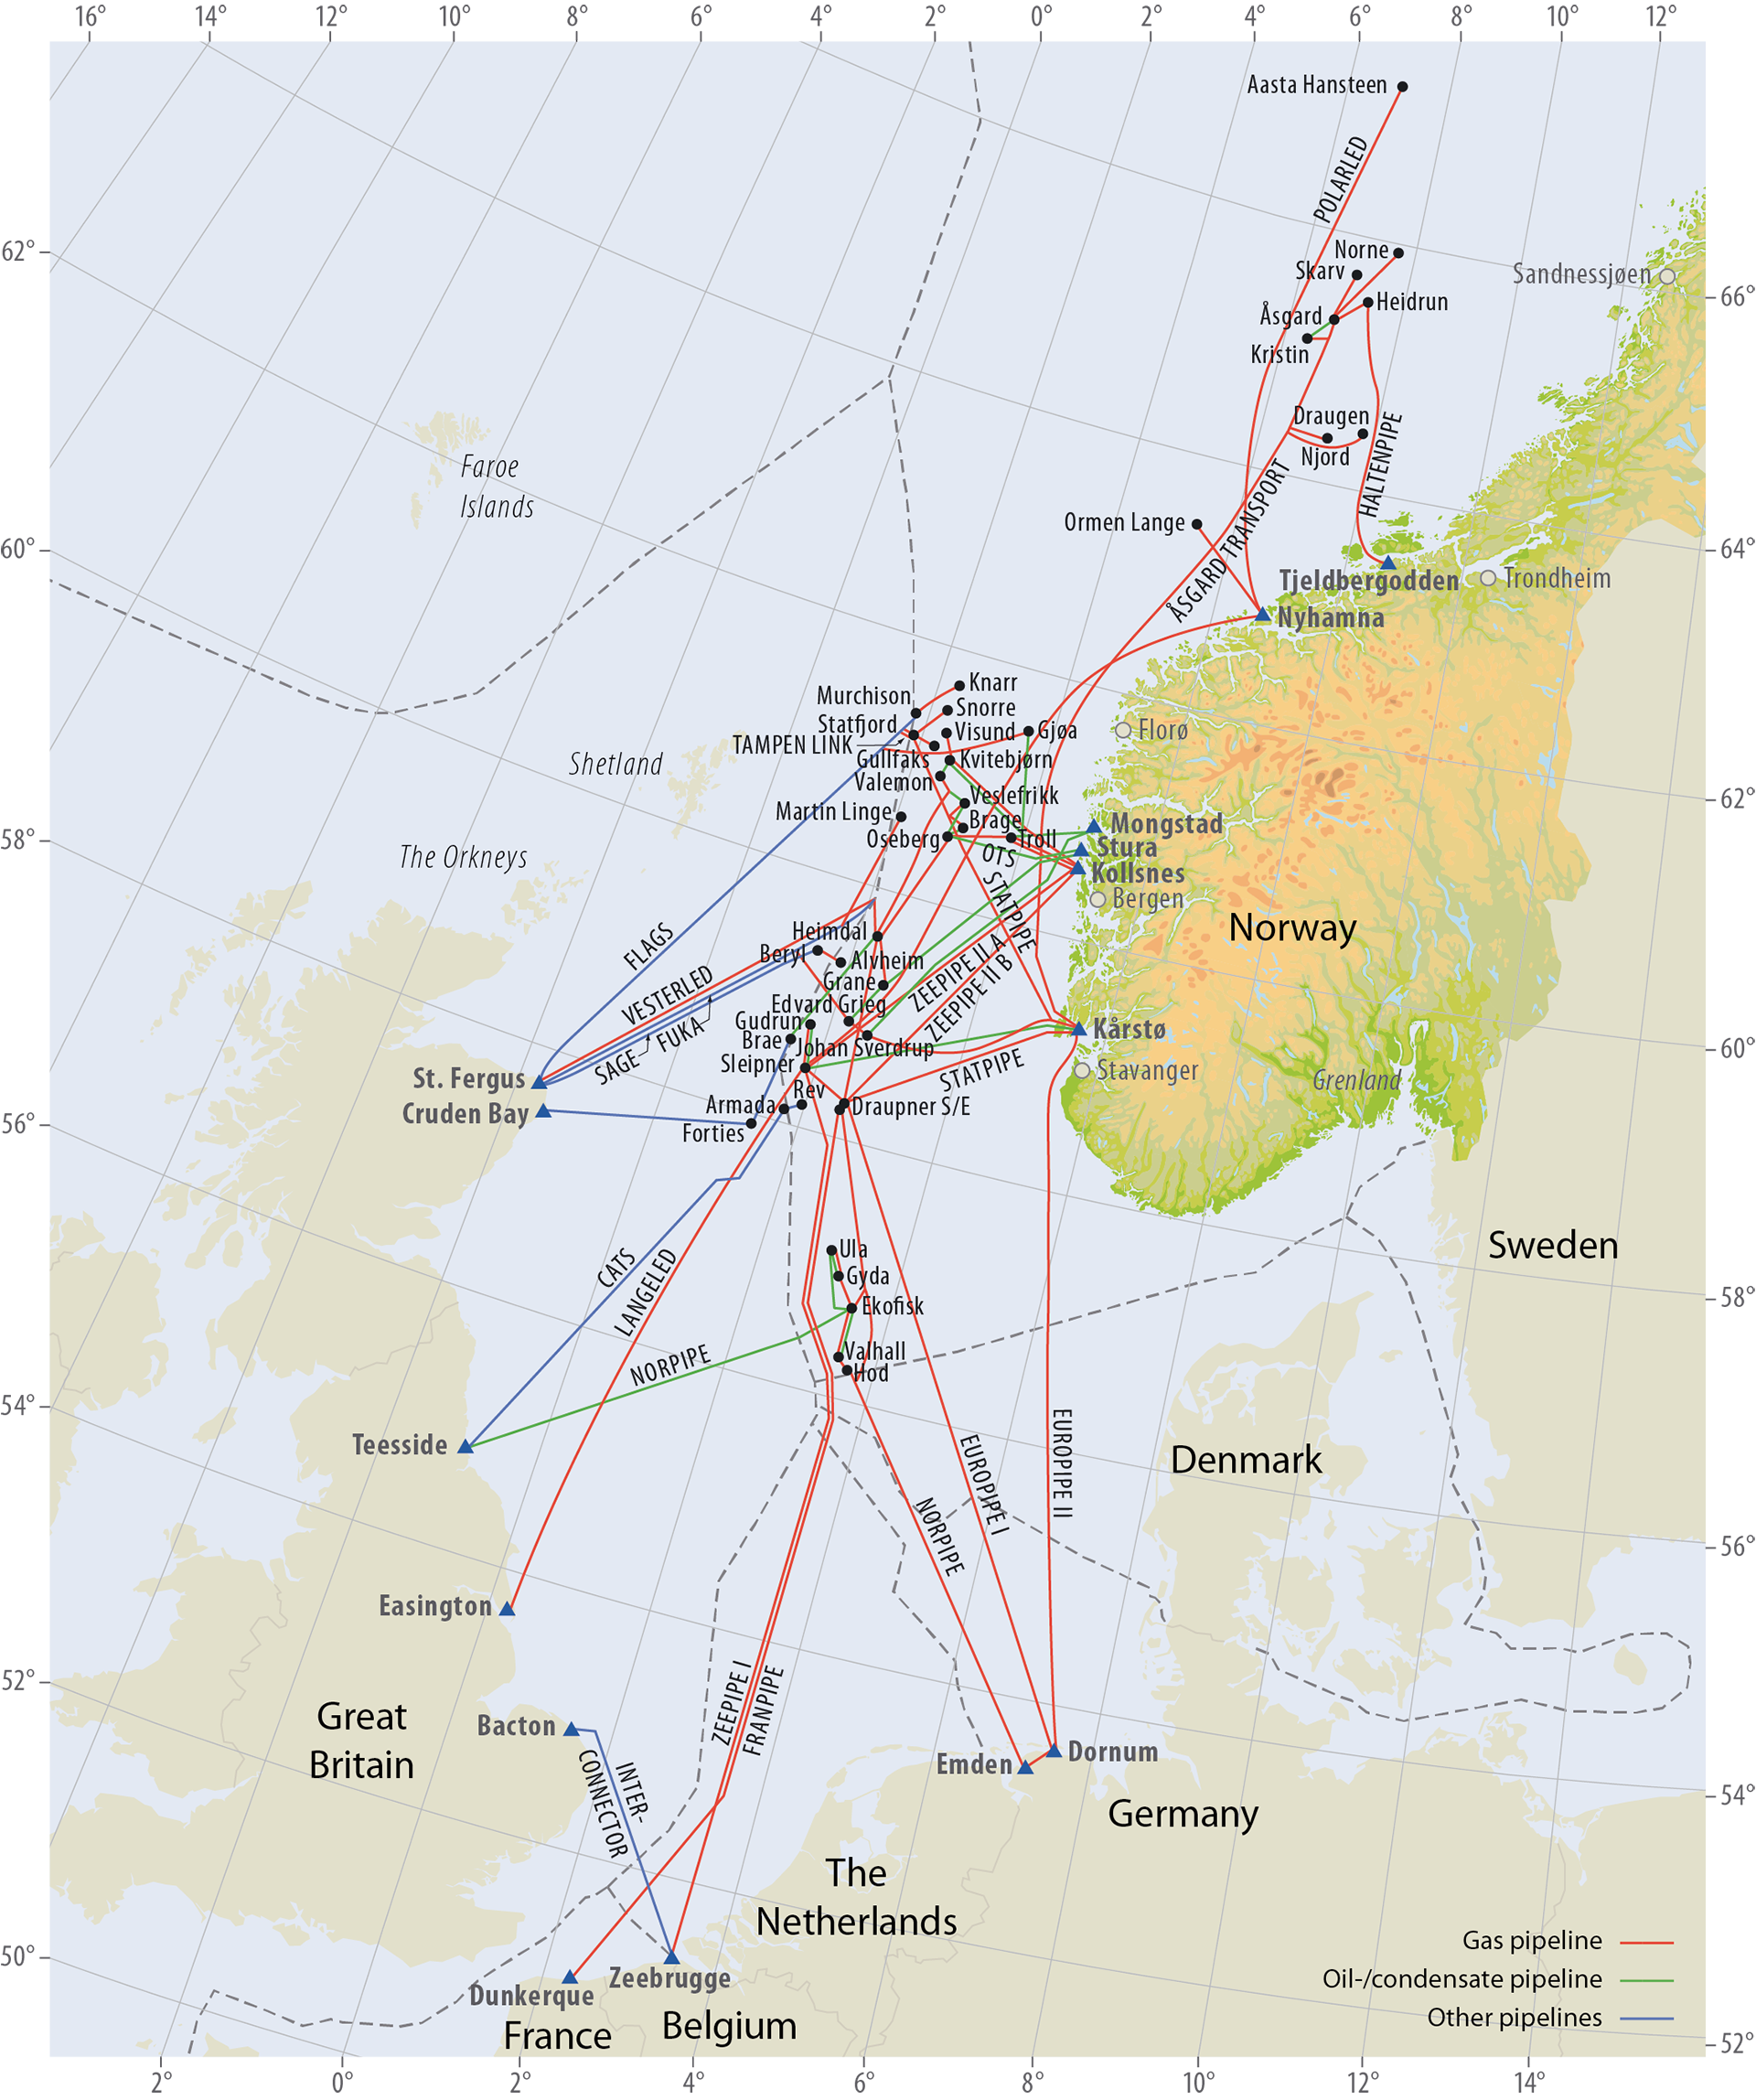 Oil, condensate and gas pipelines on the Norwegian Continental shelf